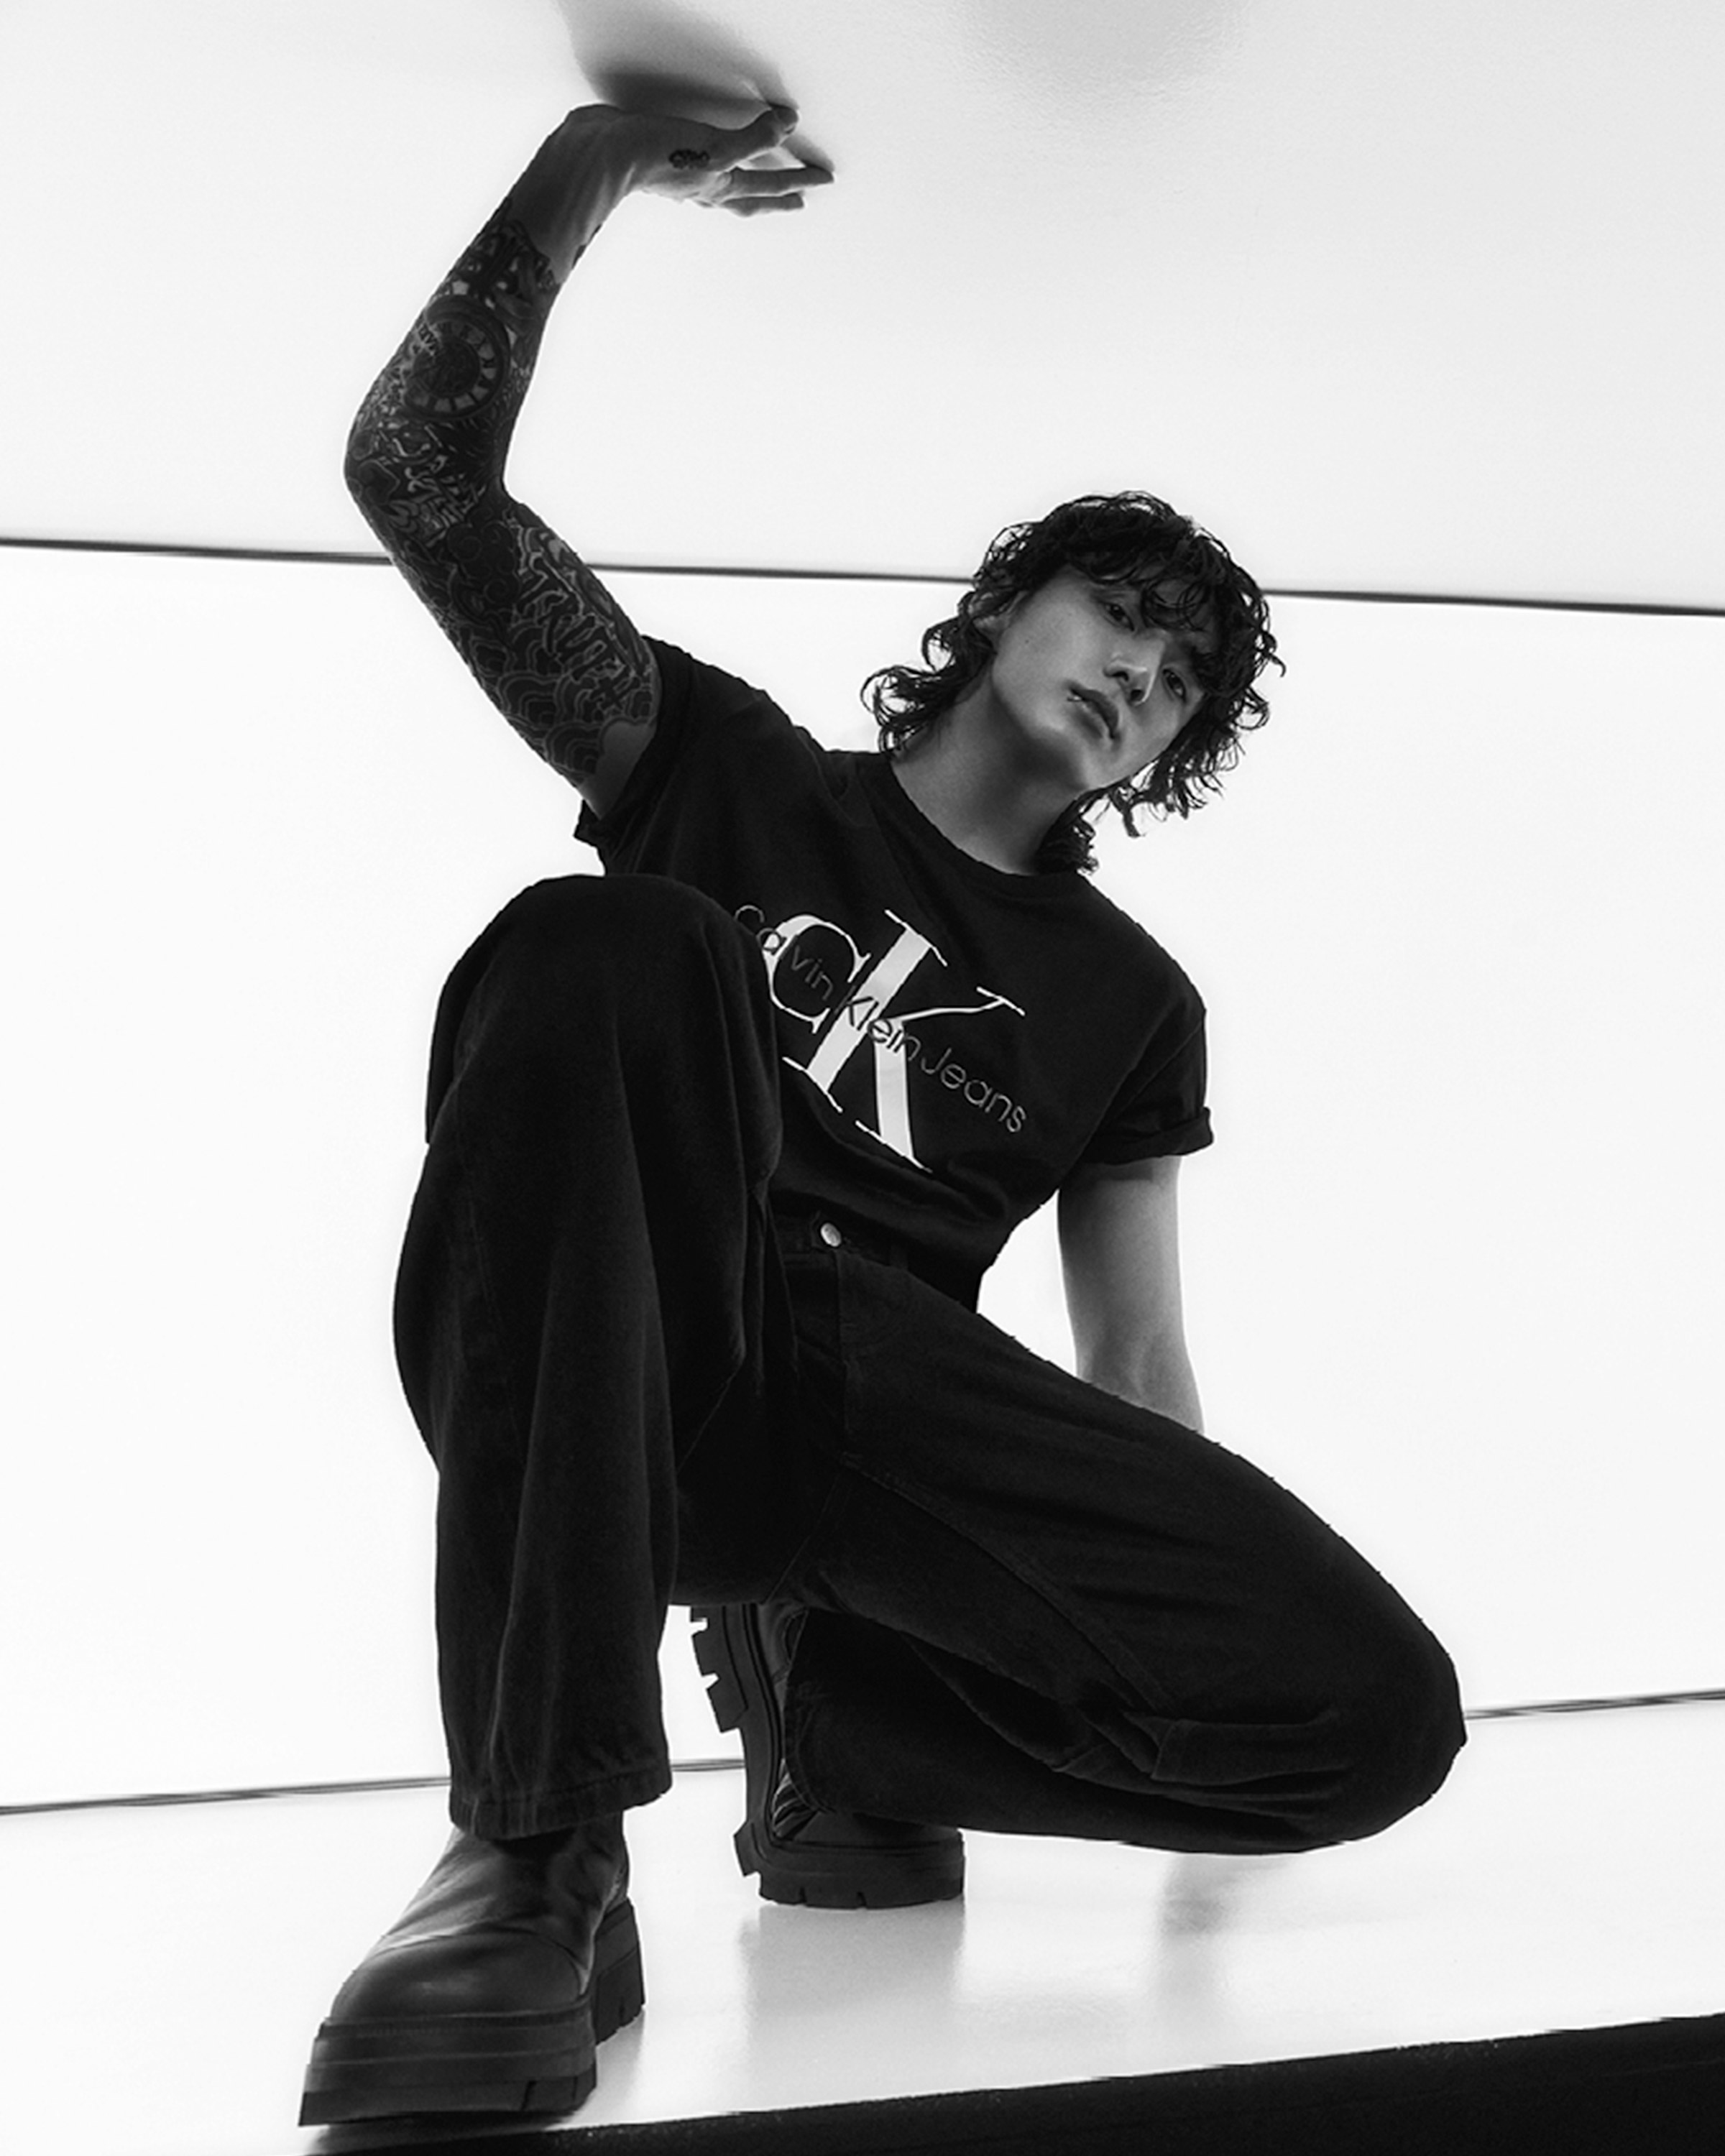 Calvin Klein Reveals New BTS' Jungkook Campaign Imagery